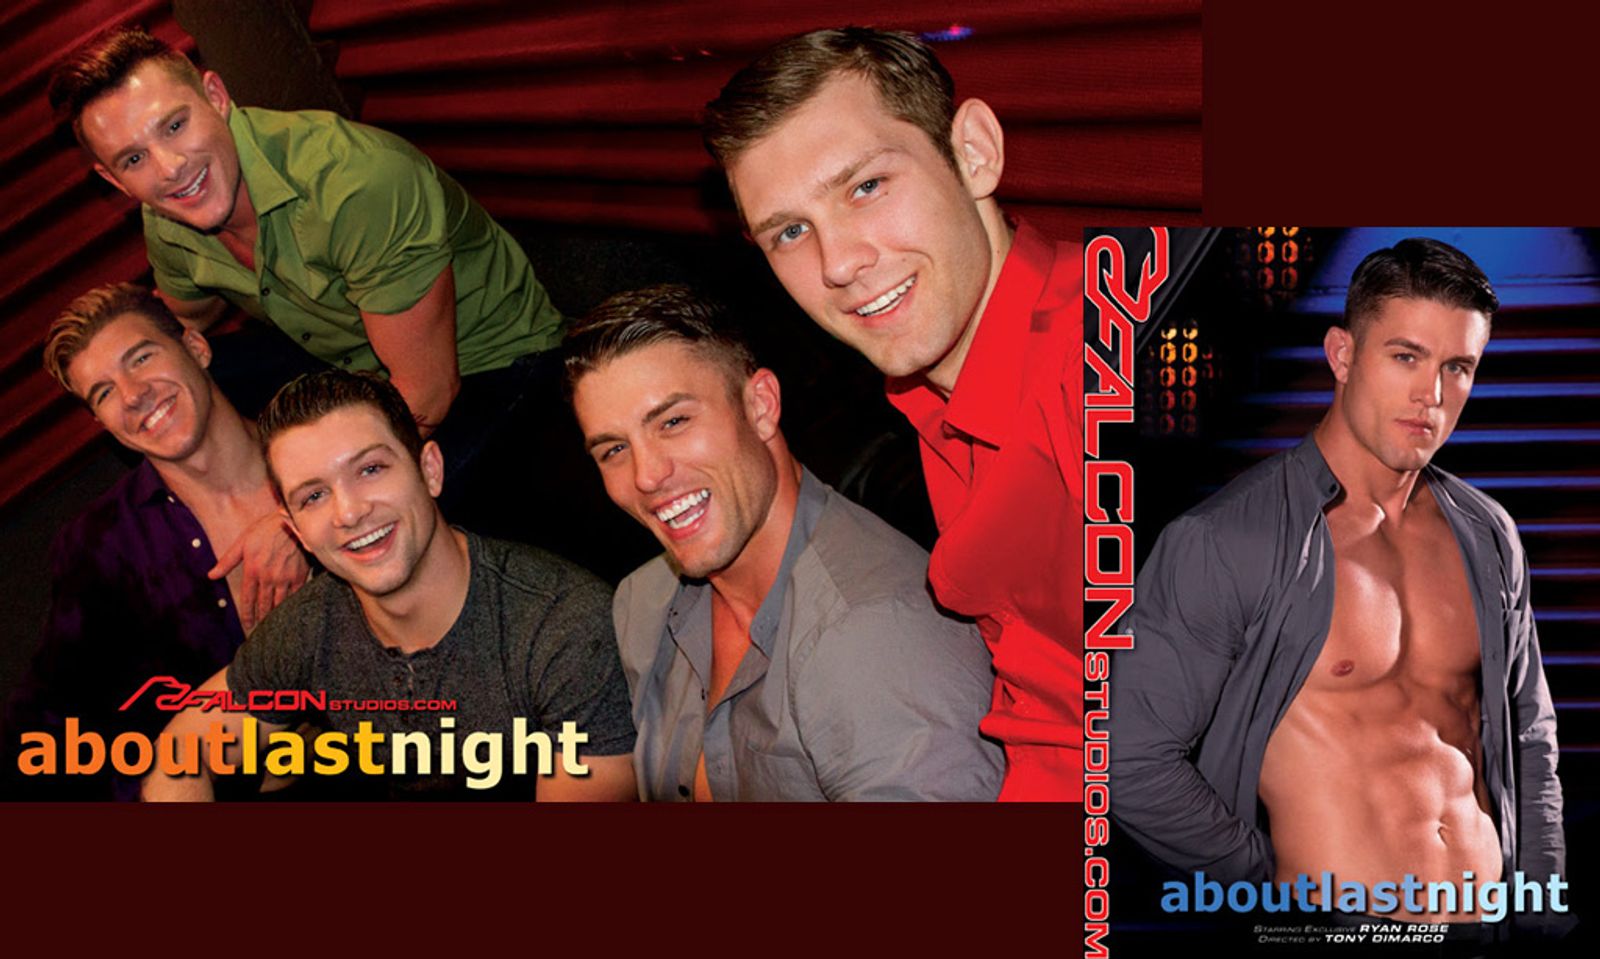 Fall Blockbuster 'About Last Night' Available From Falcon Today